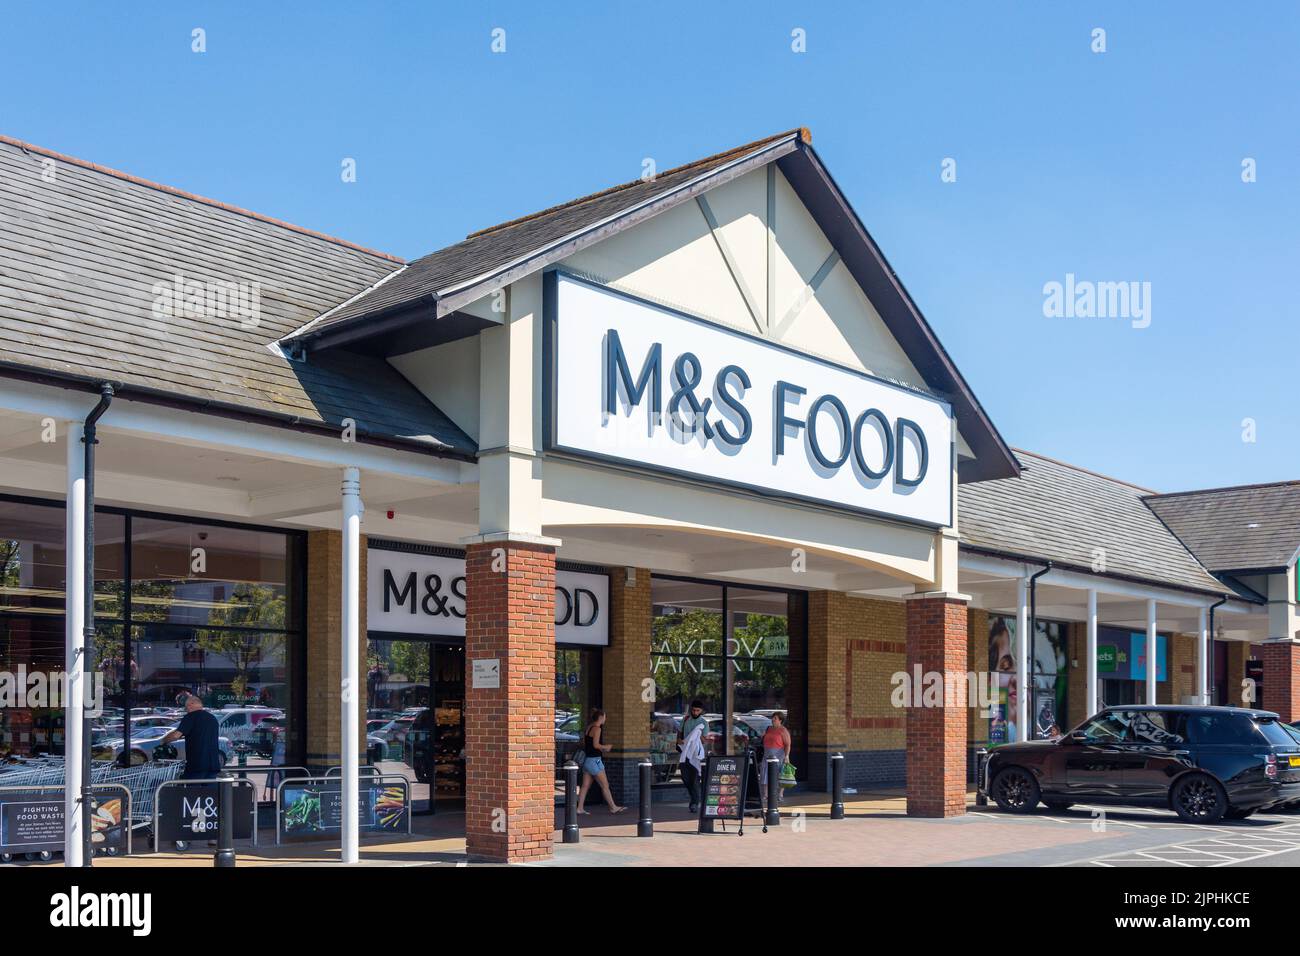 Entrada a M&S Food Hall, centro comercial Two Rivers, Staines-upon-Thames, Surrey, Inglaterra, Reino Unido Foto de stock